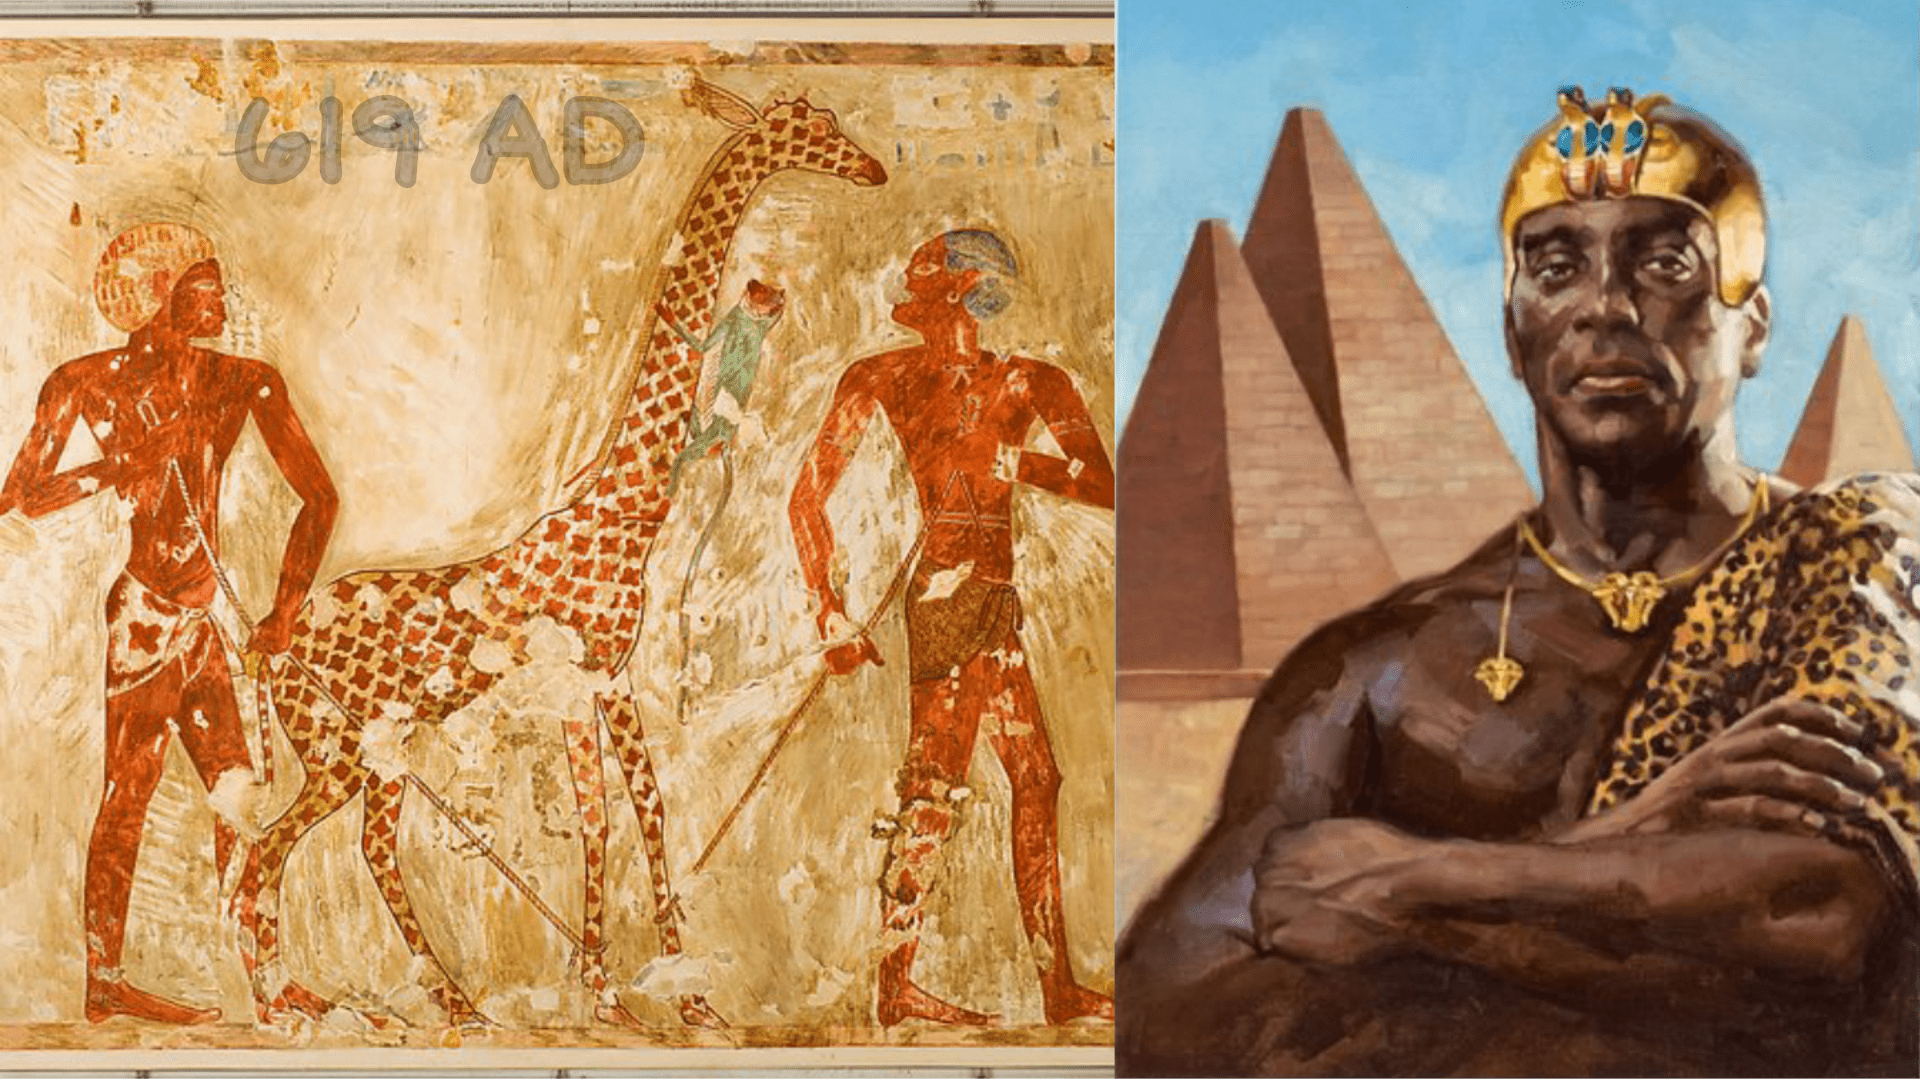 Over 1400 years ago, Nubians defeated Persians & sent them a gift of a giraffe